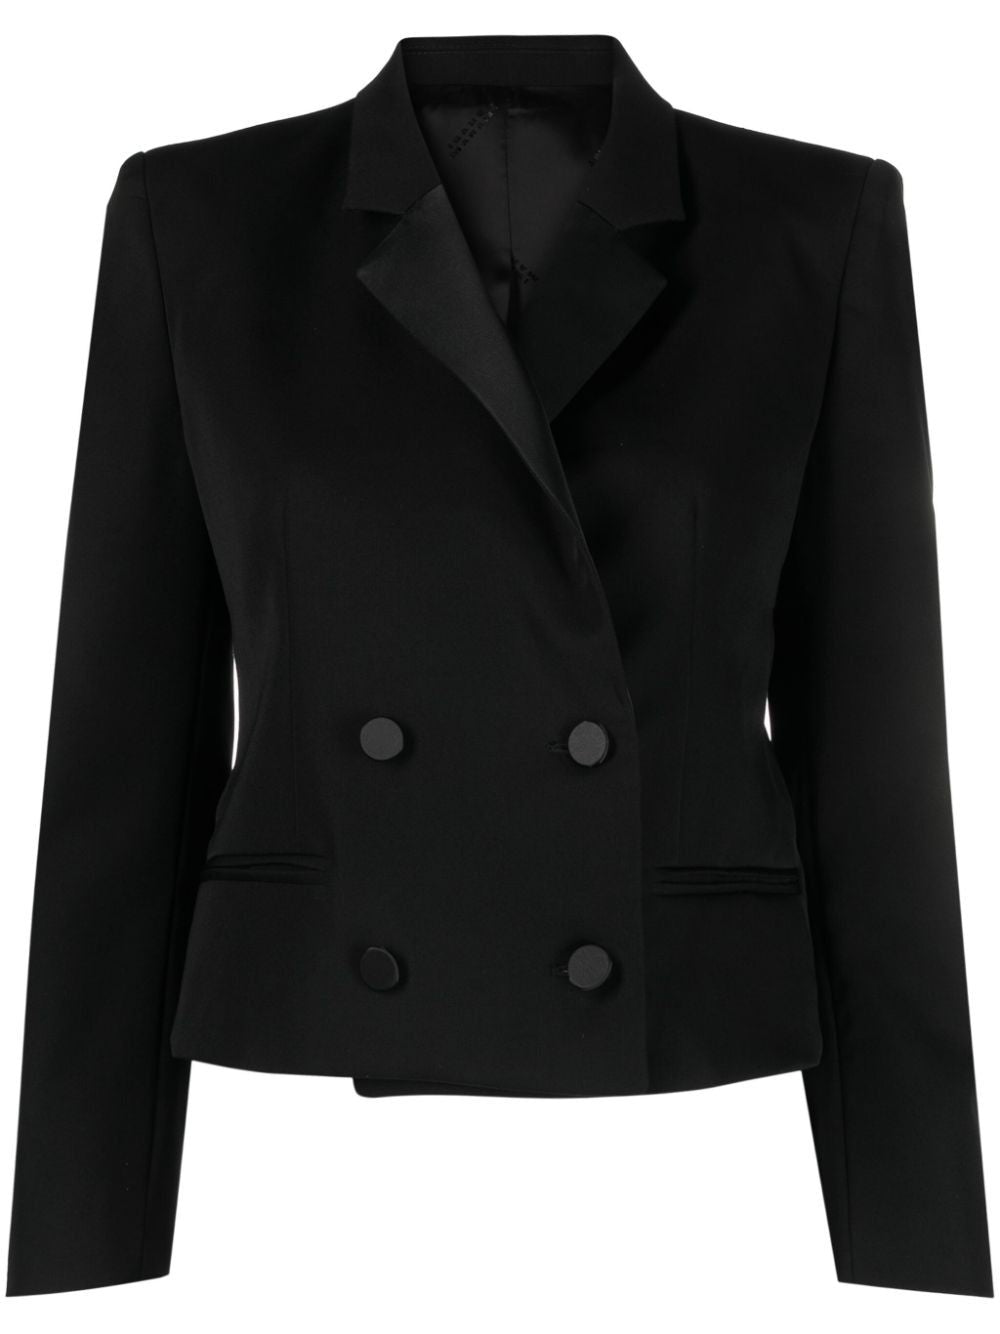 ISABEL MARANT Black Wool Coat for Women - FW23 Collection